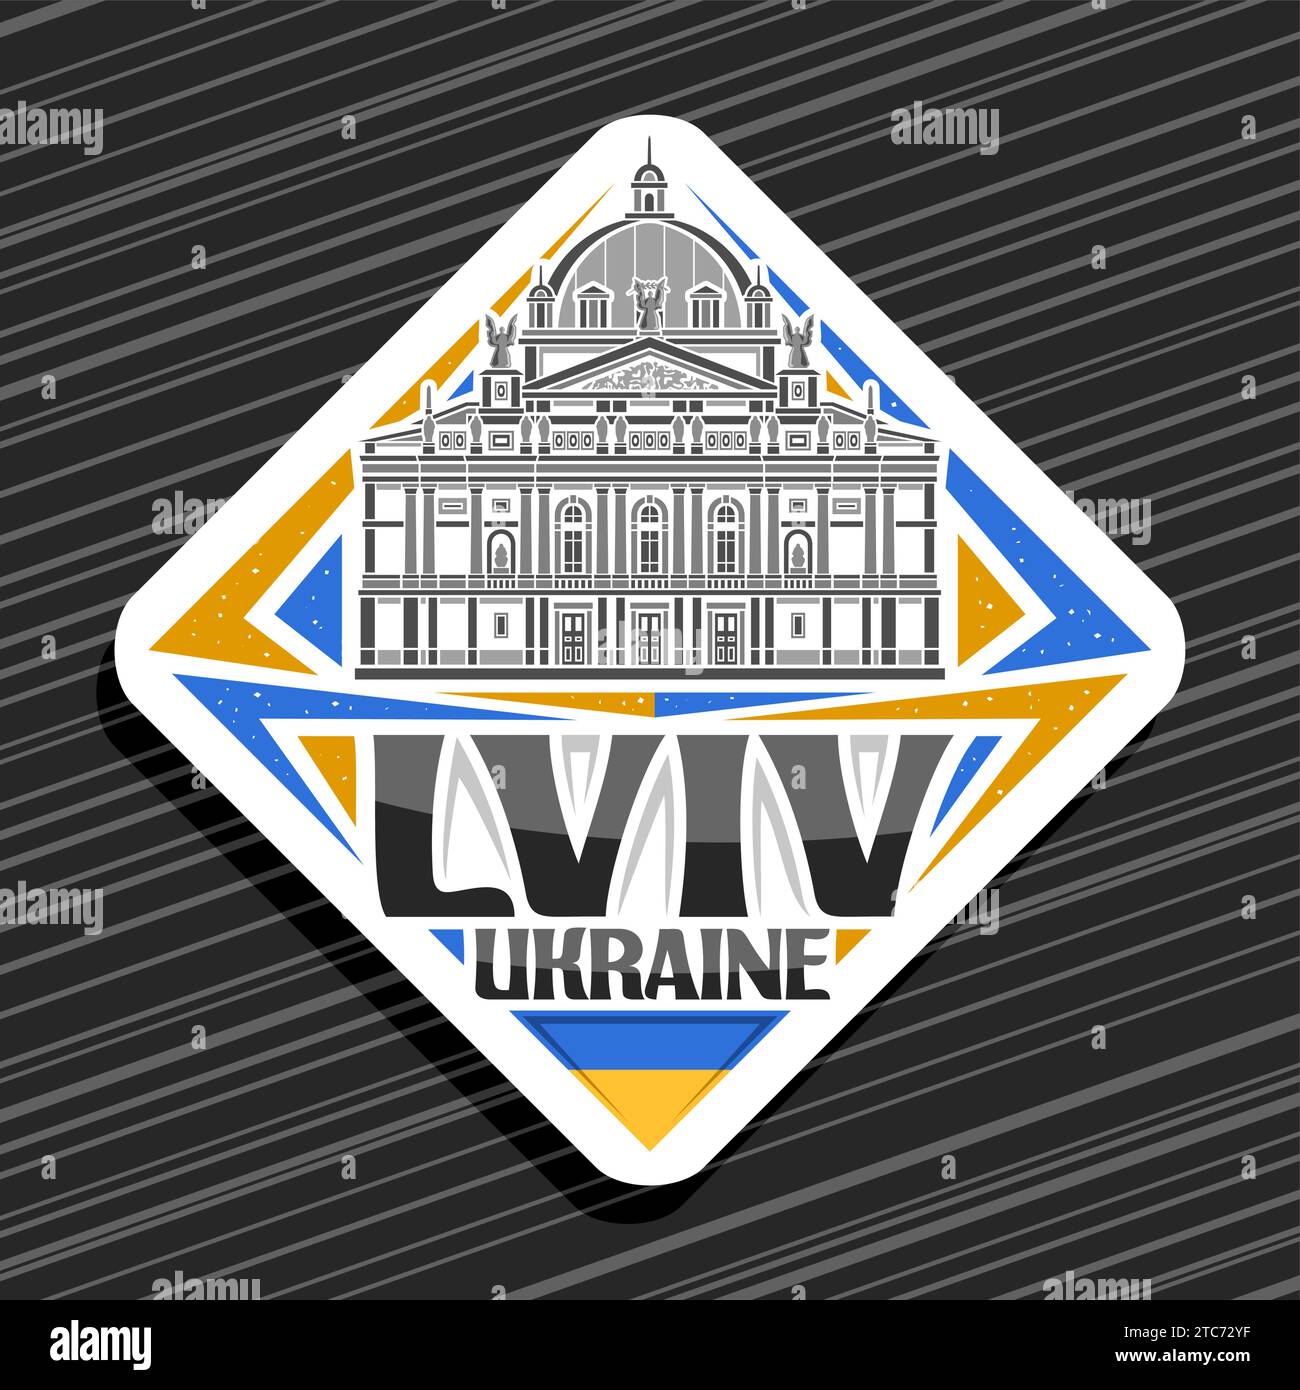 Vector logo for Lviv, white rhombus road sign with outline illustration of famous lviv theatre of opera and ballet, decorative refrigerator magnet wit Stock Vector